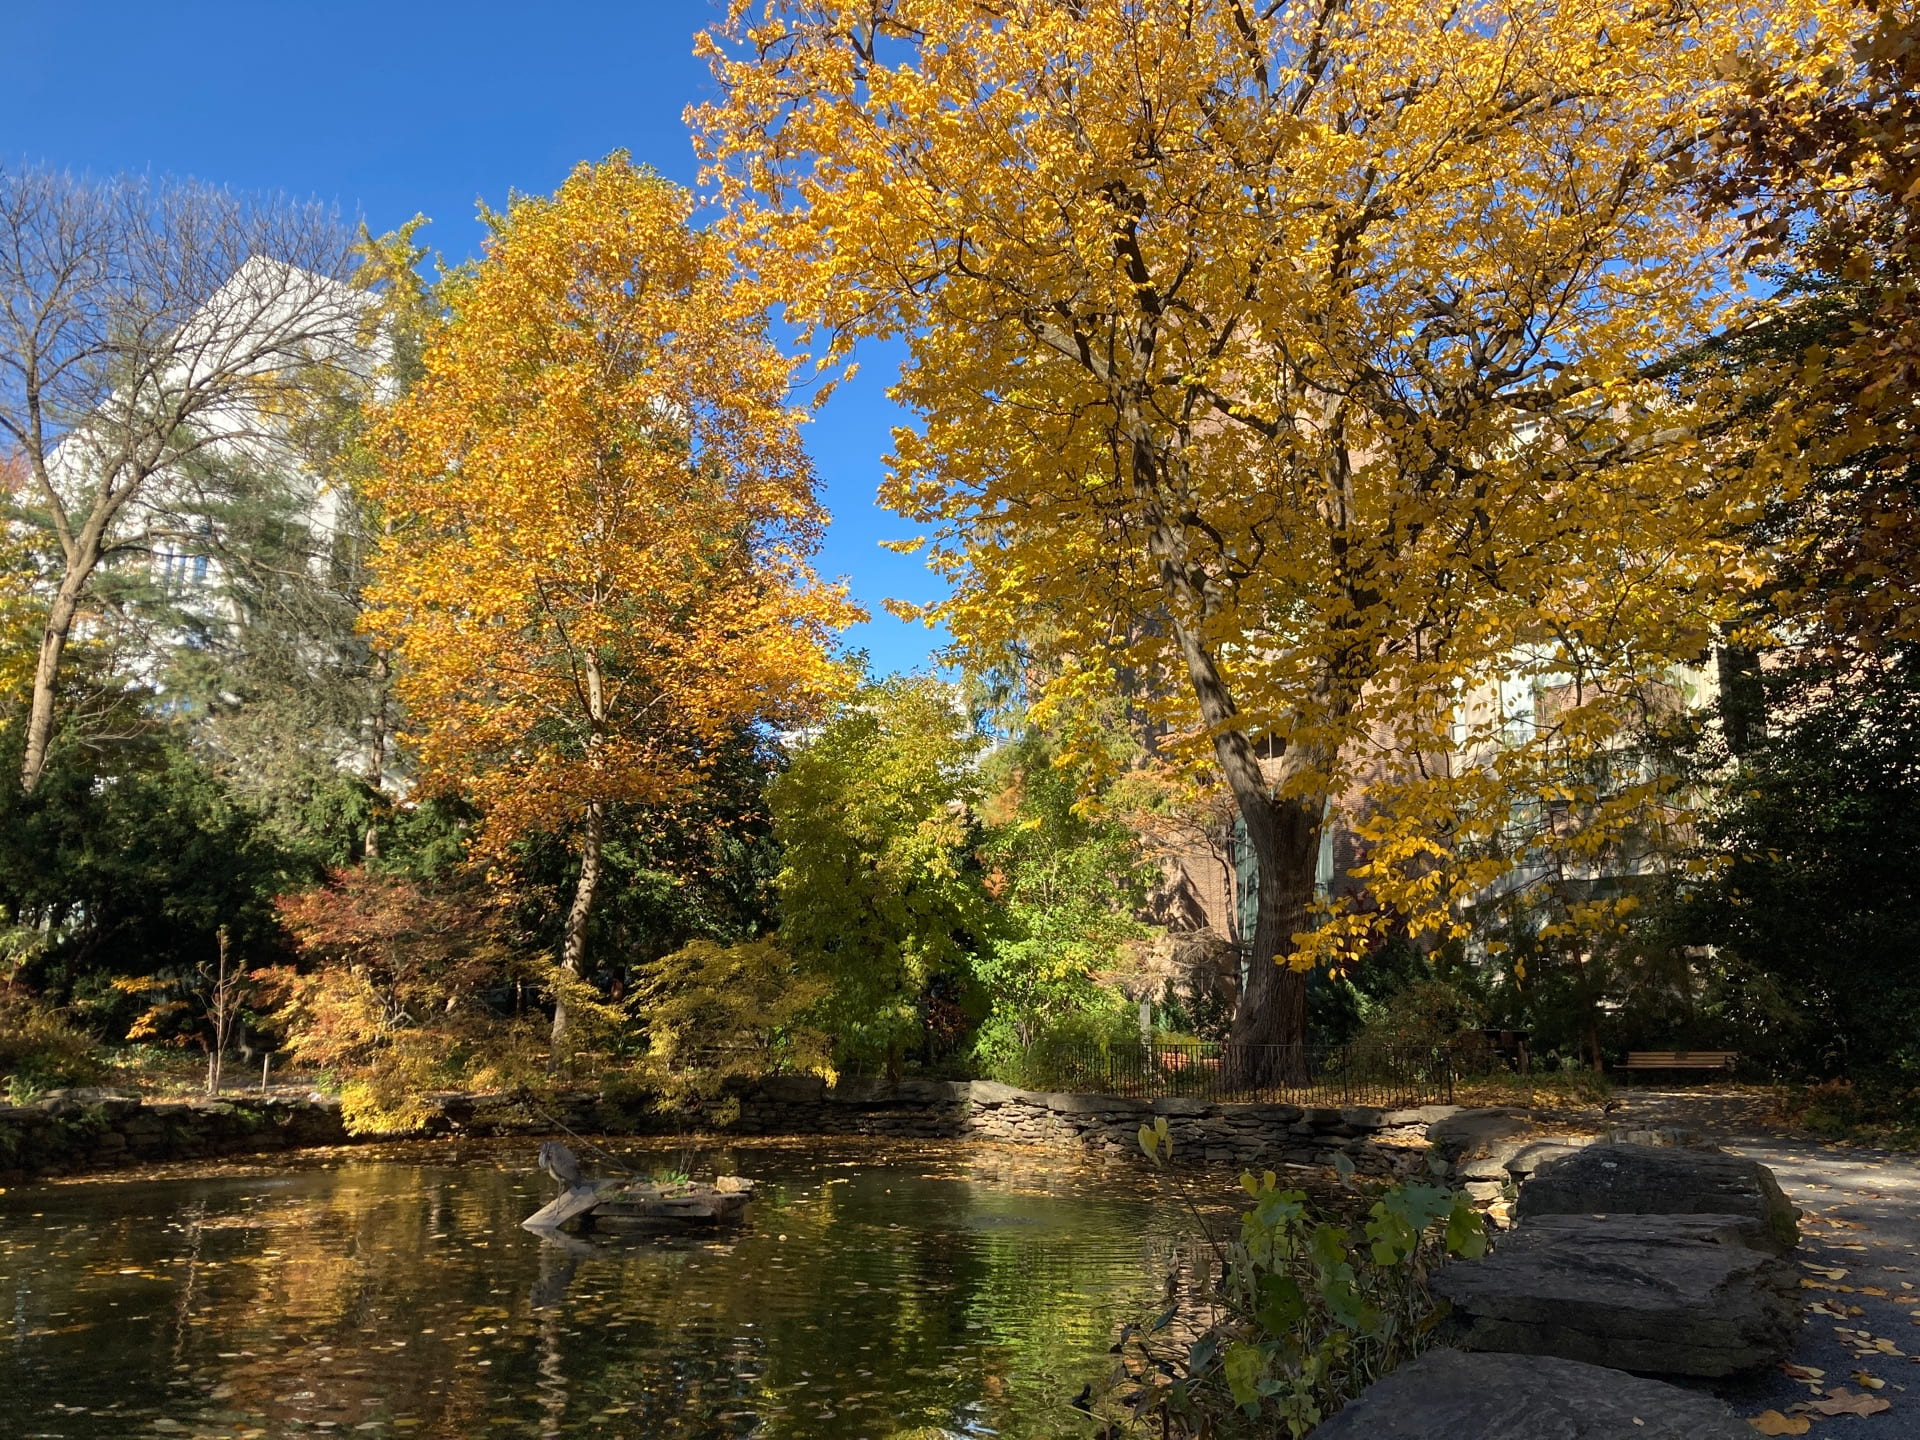 The fall color of Ulmus americana and Liriodendron tulipifera are amplified as they are reflected on the pond's surface.